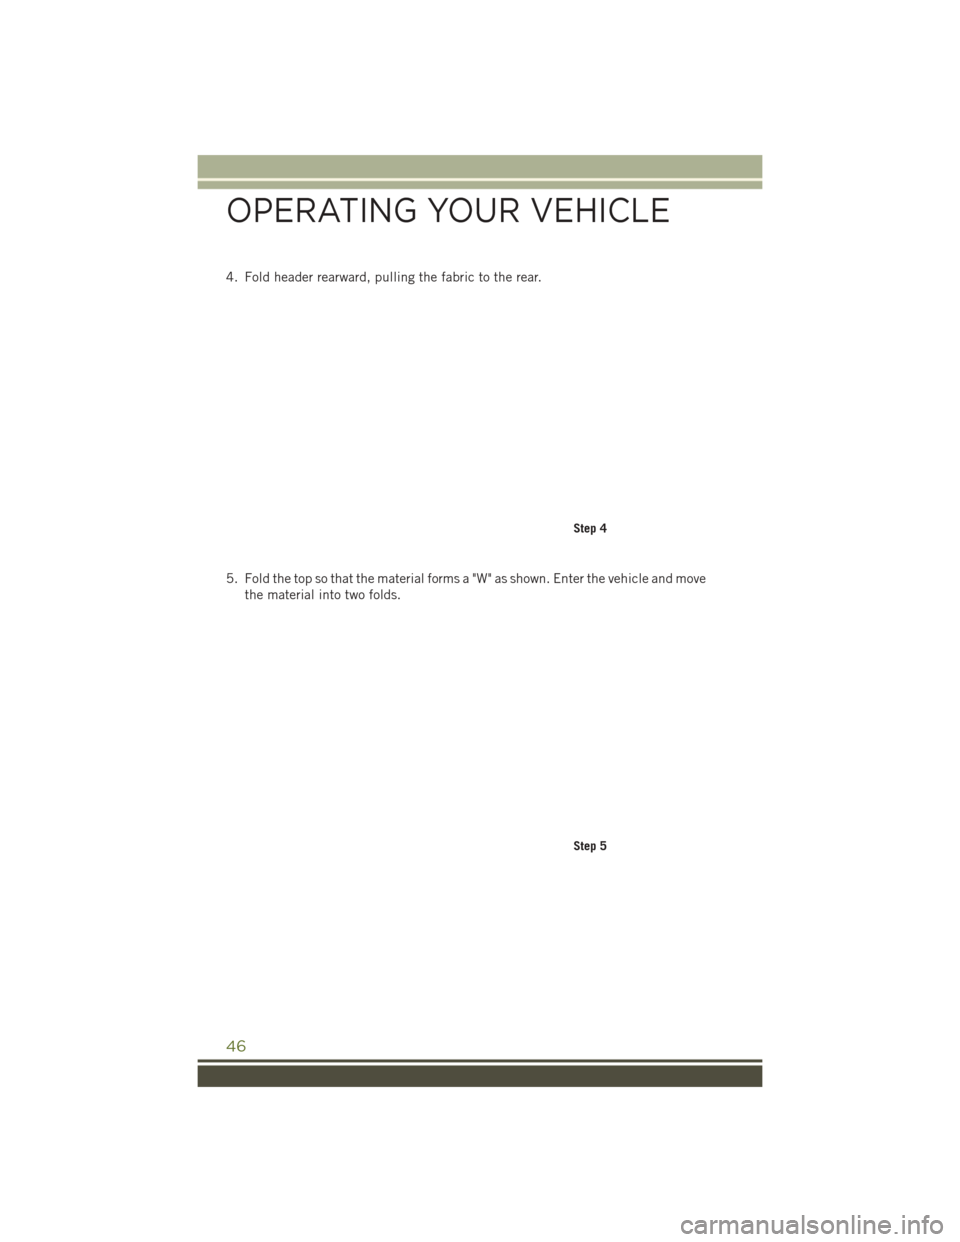 JEEP WRANGLER 2016 JK / 3.G Service Manual 4. Fold header rearward, pulling the fabric to the rear.
5. Fold the top so that the material forms a "W" as shown. Enter the vehicle and movethe material into two folds.
Step 4
Step 5
OPERATING YOUR 